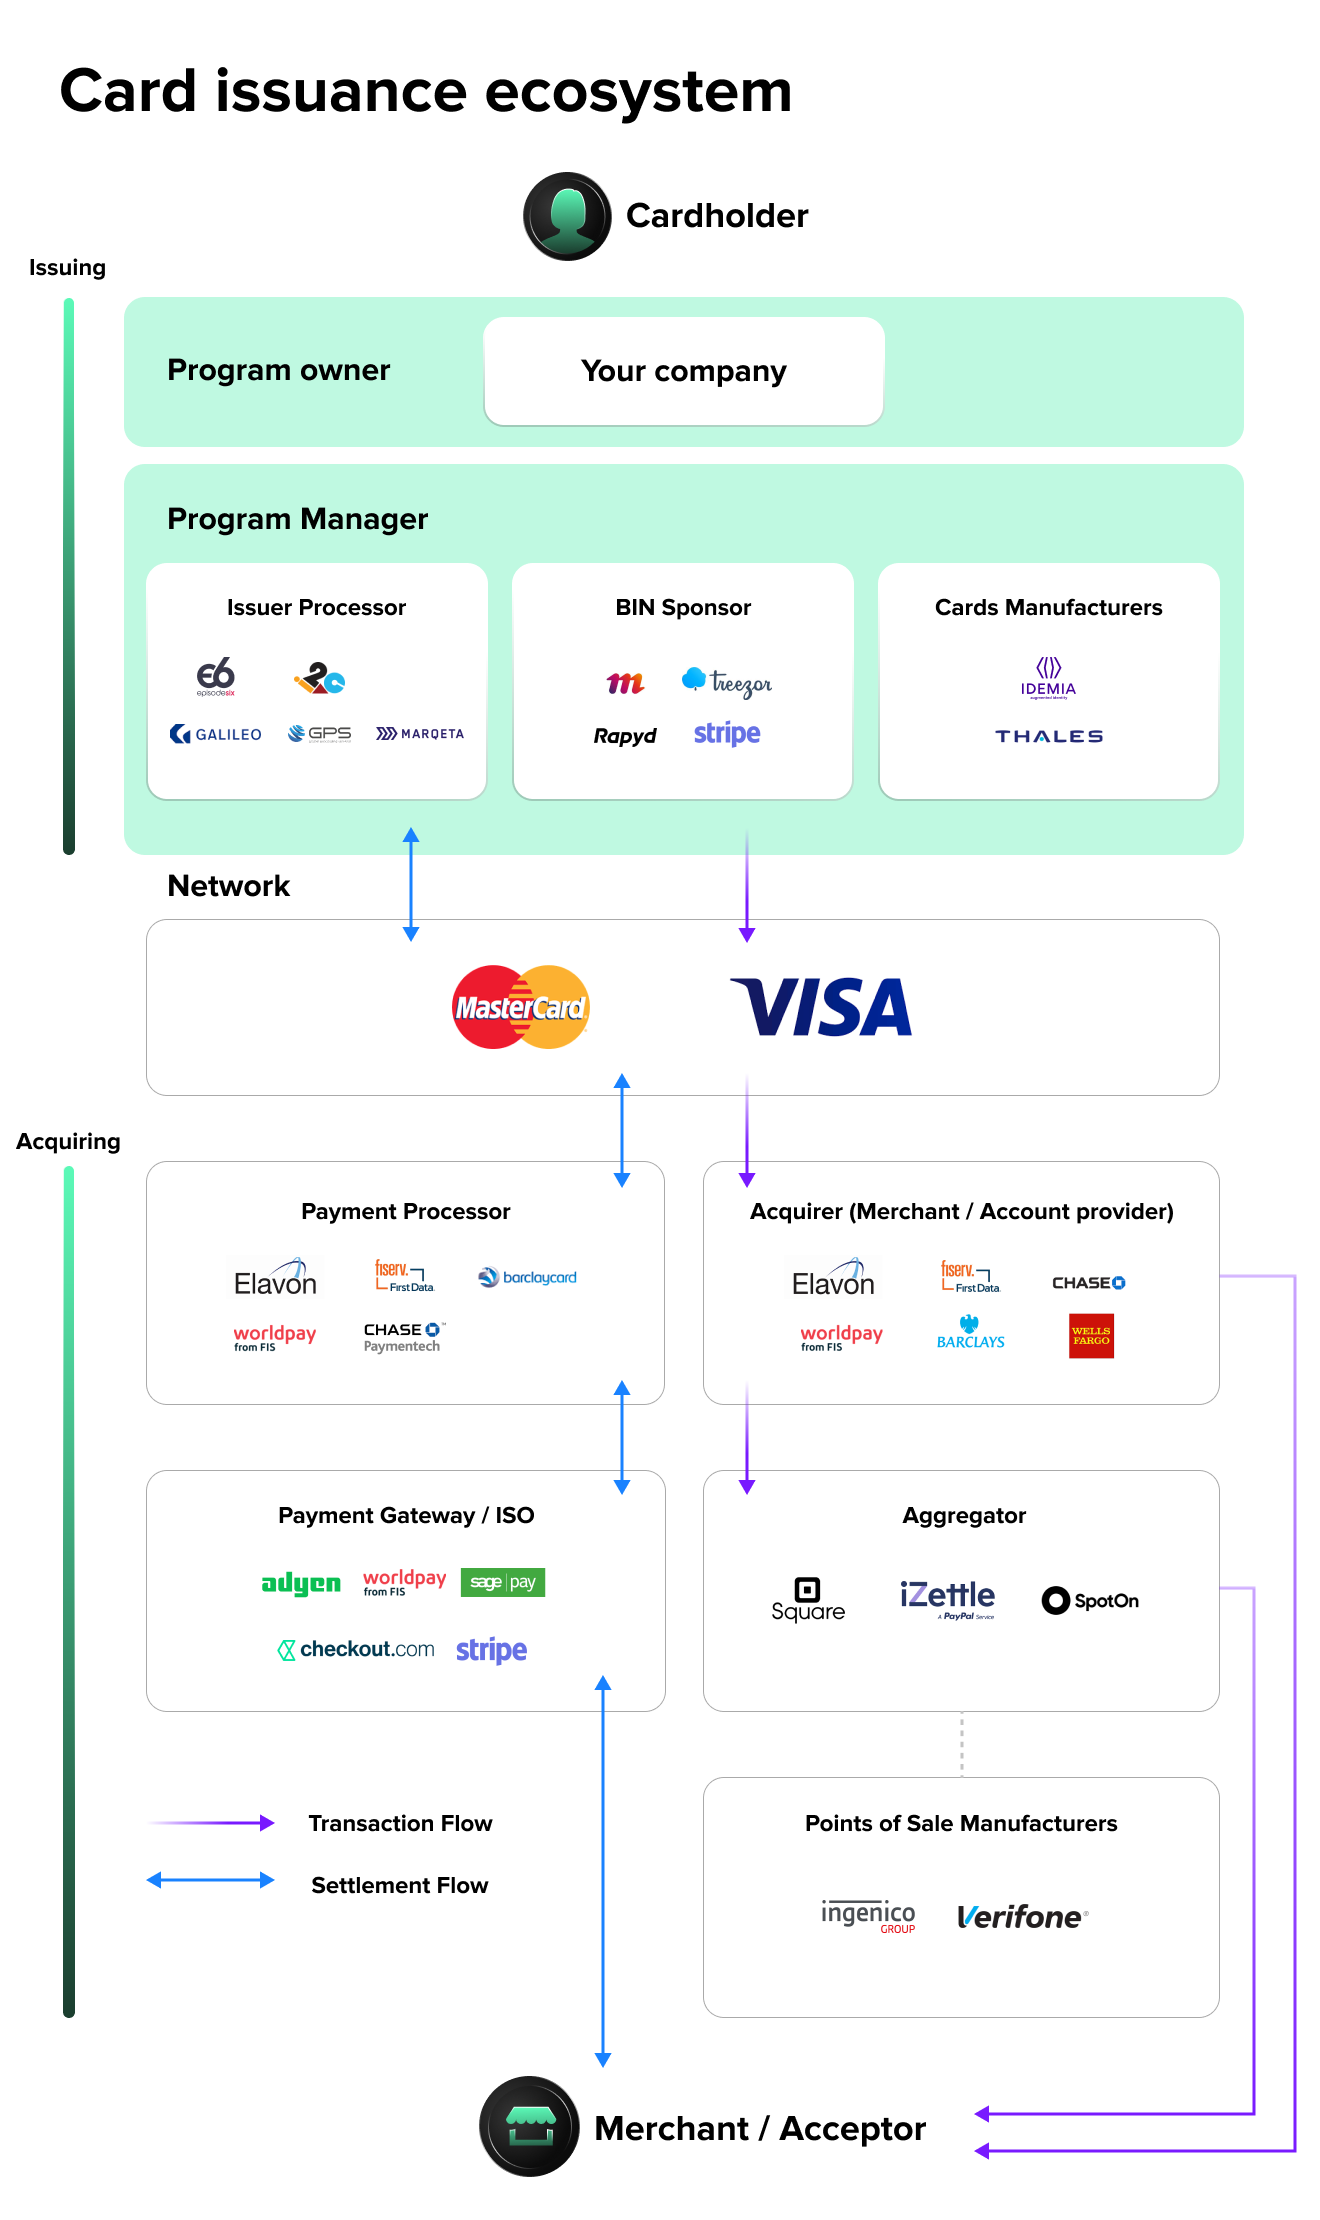 Card issuance ecosystem with company clusters including Issuer Processors, Payments, Processors, Acquirers, Payment Gateways